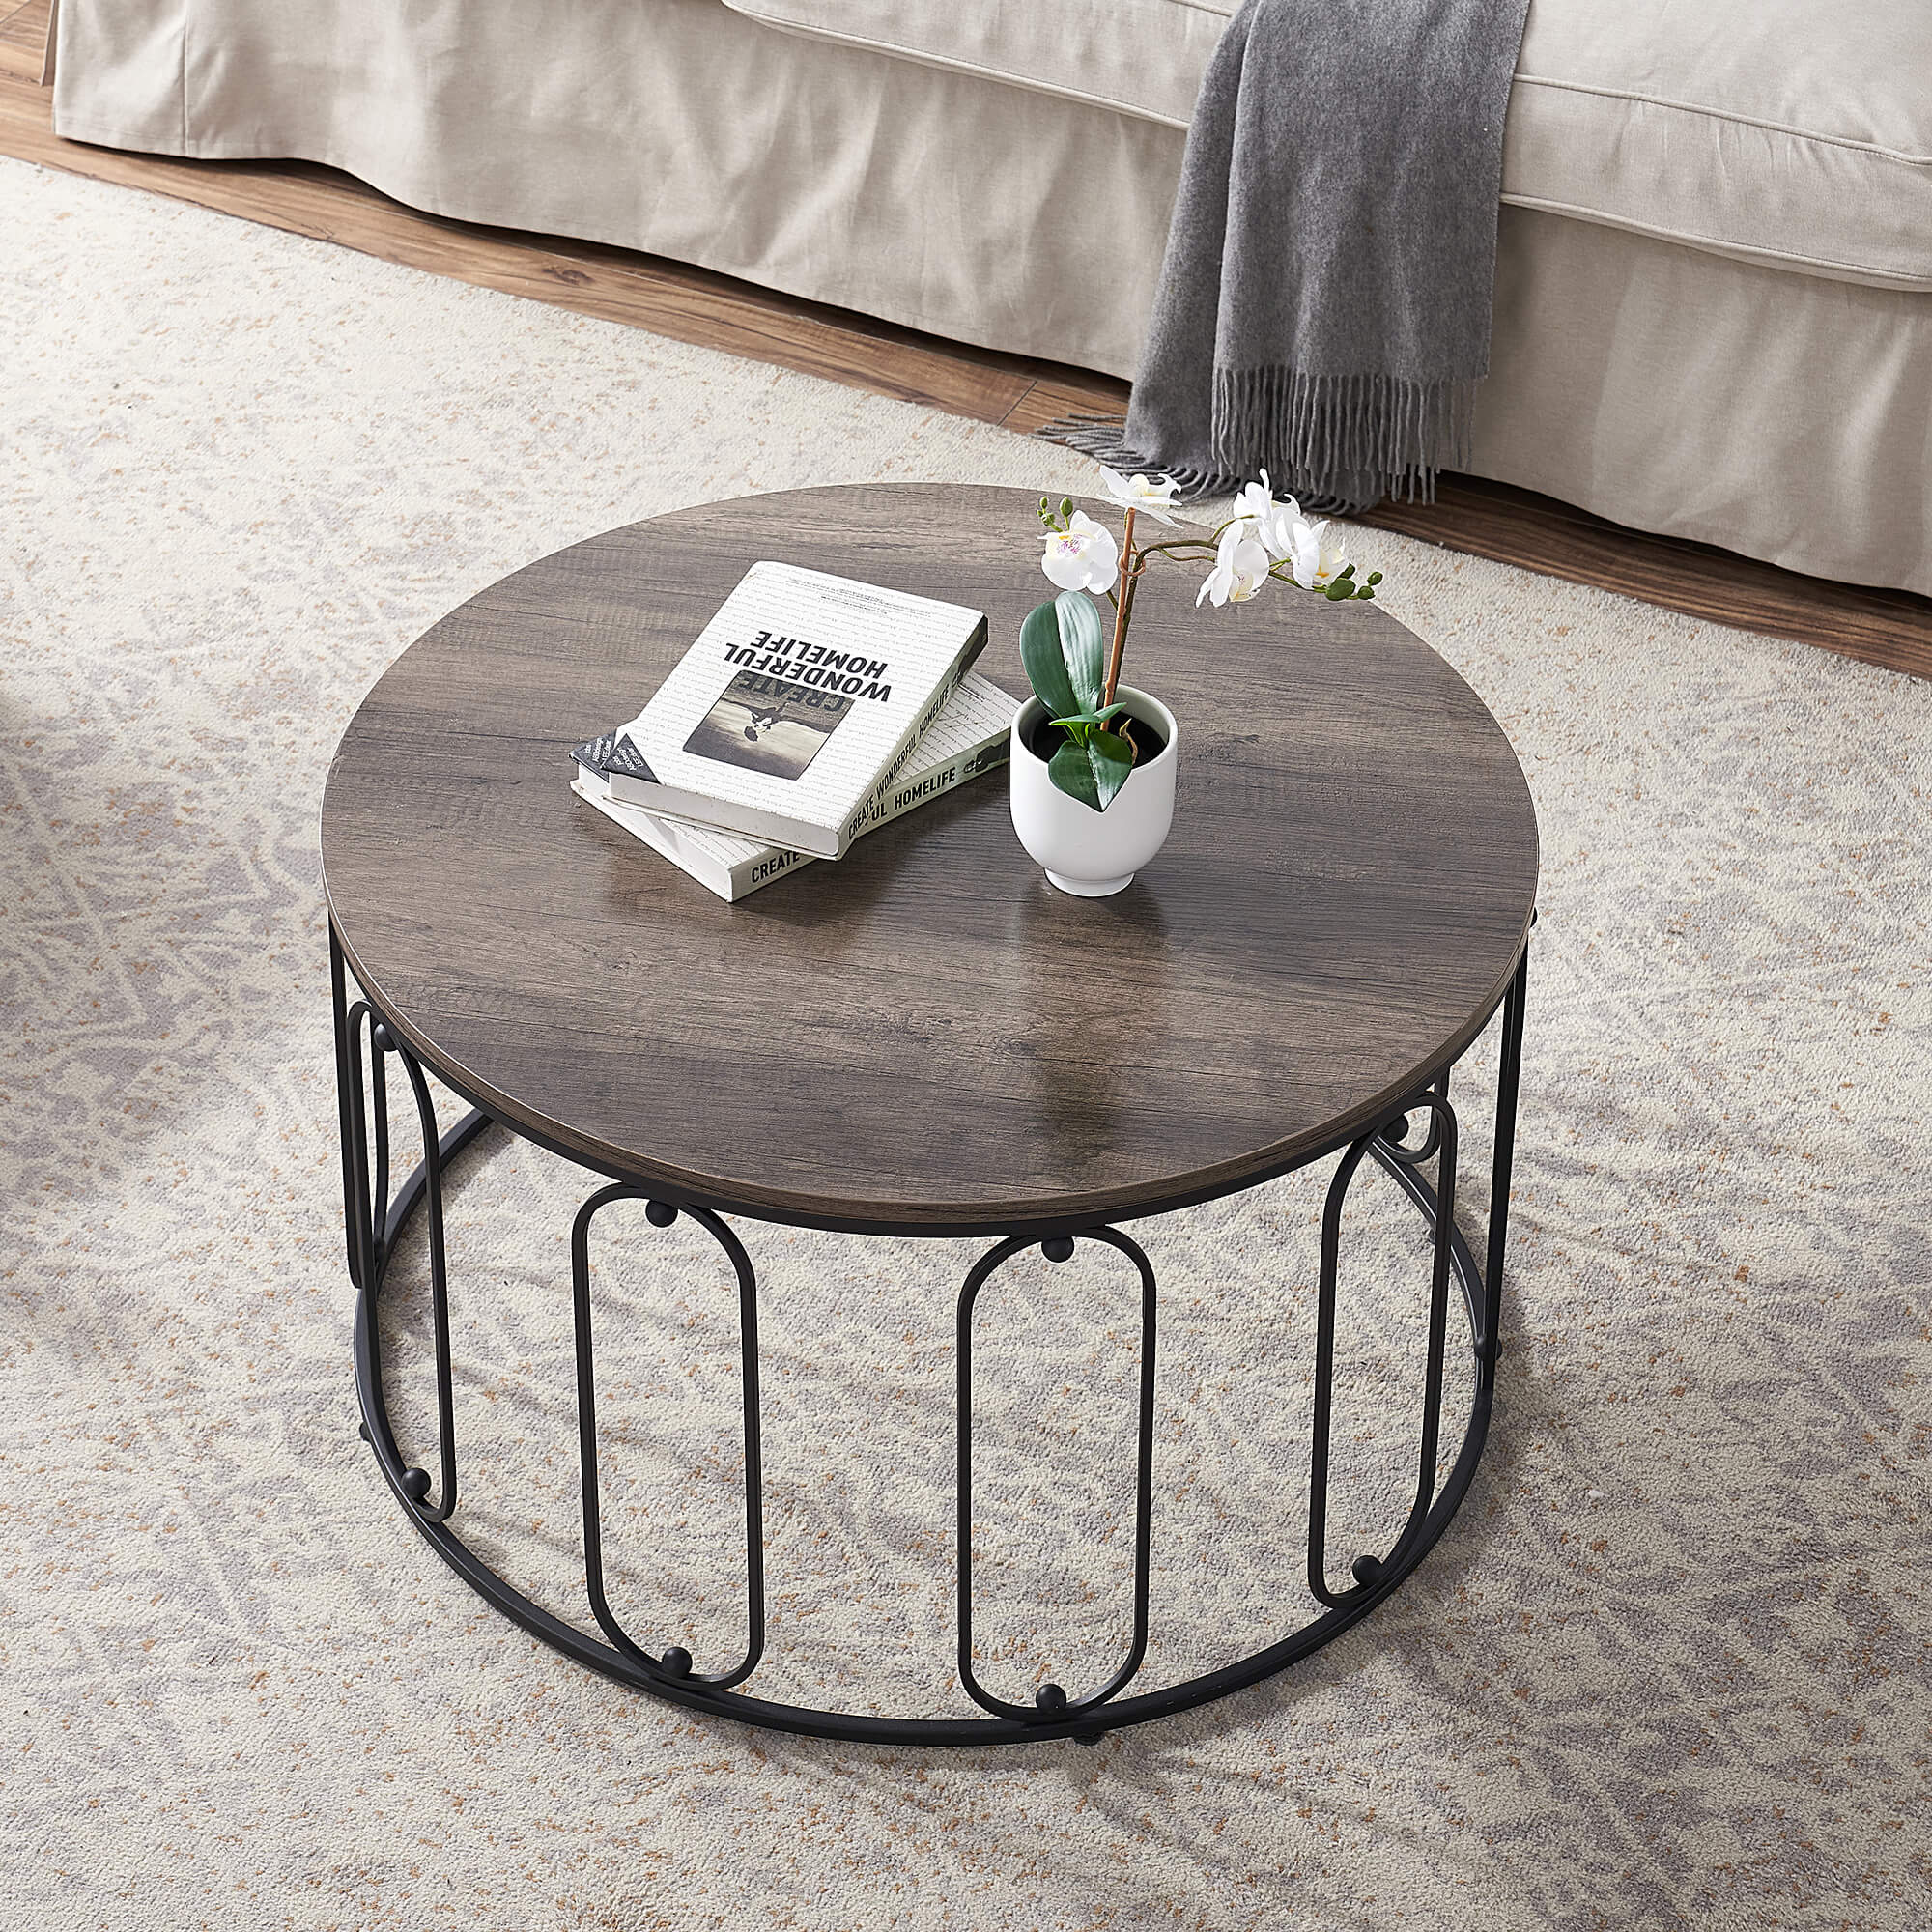 Ivinta Modern Round Coffee Table for Living Room, 31.5 inch Tea Tables